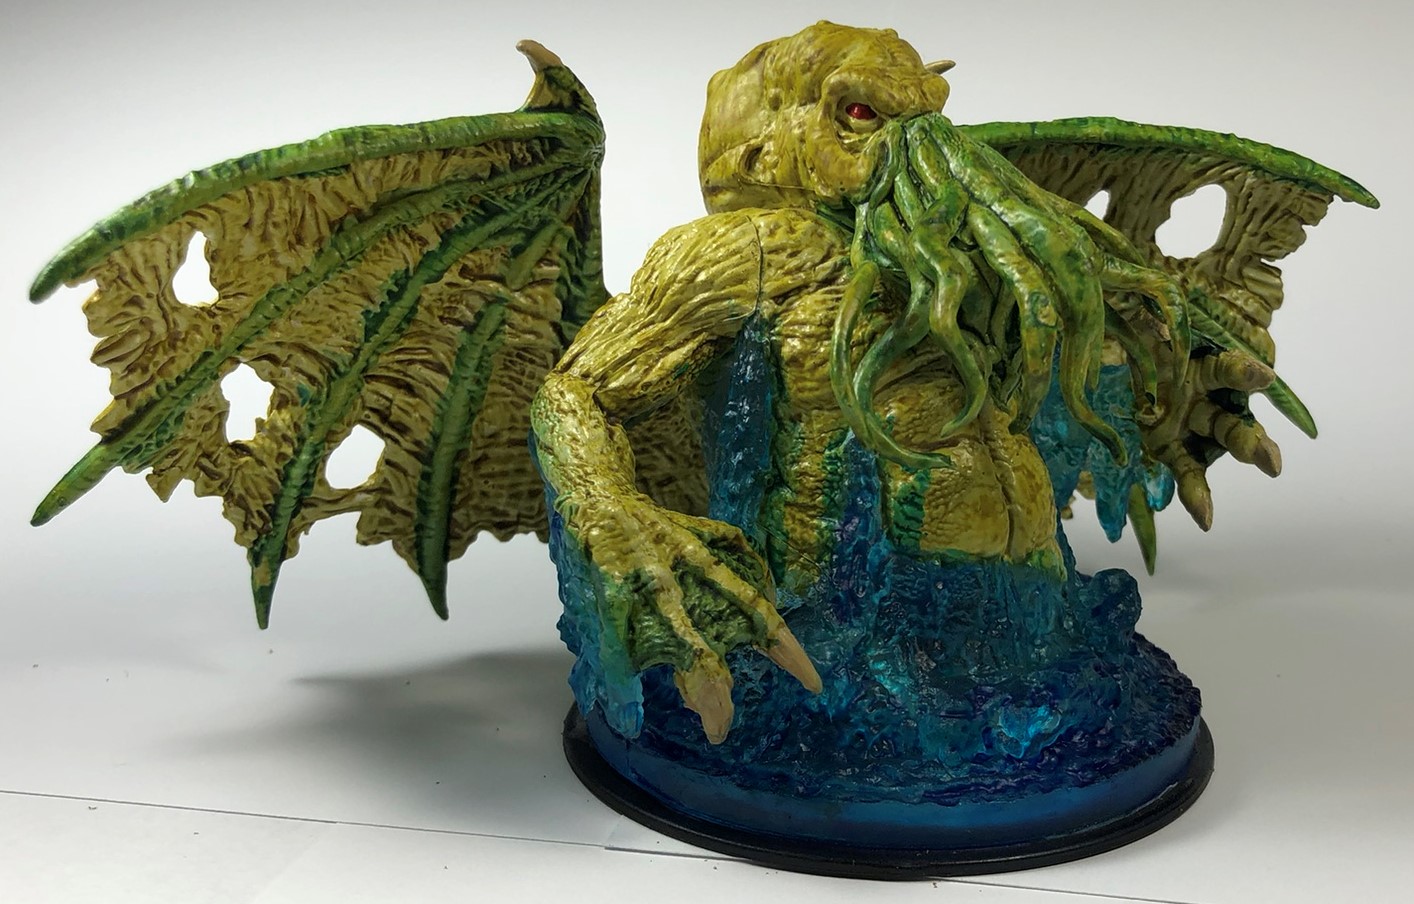 Monster: Cthulhu (Old Ones)